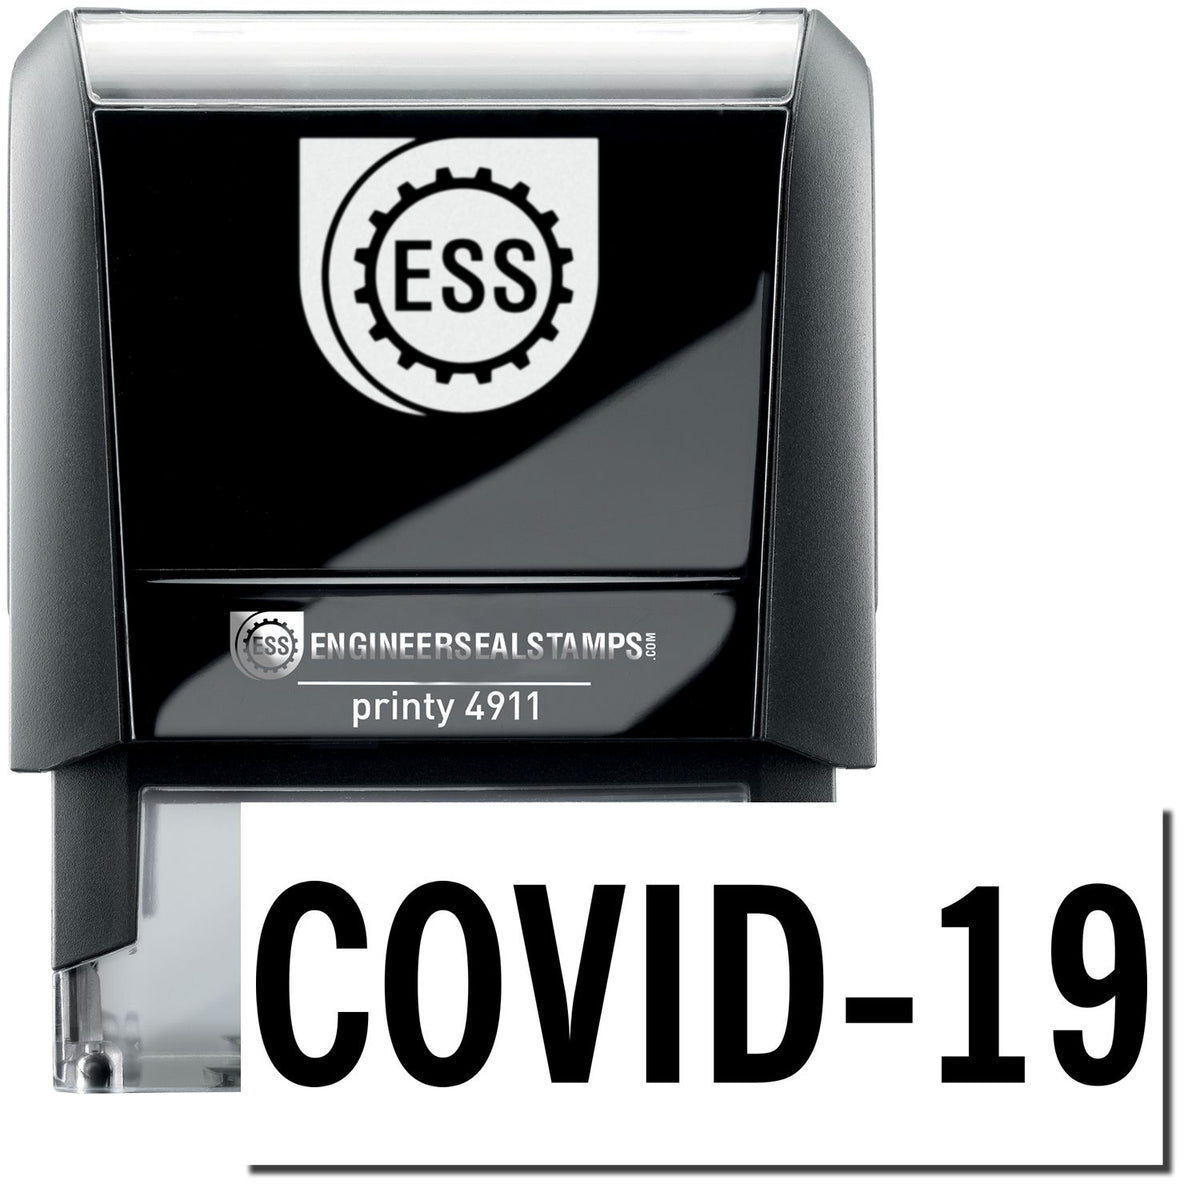 A self-inking stamp with a stamped image showing how the text &quot;COVID-19&quot; in bold font is displayed after stamping.